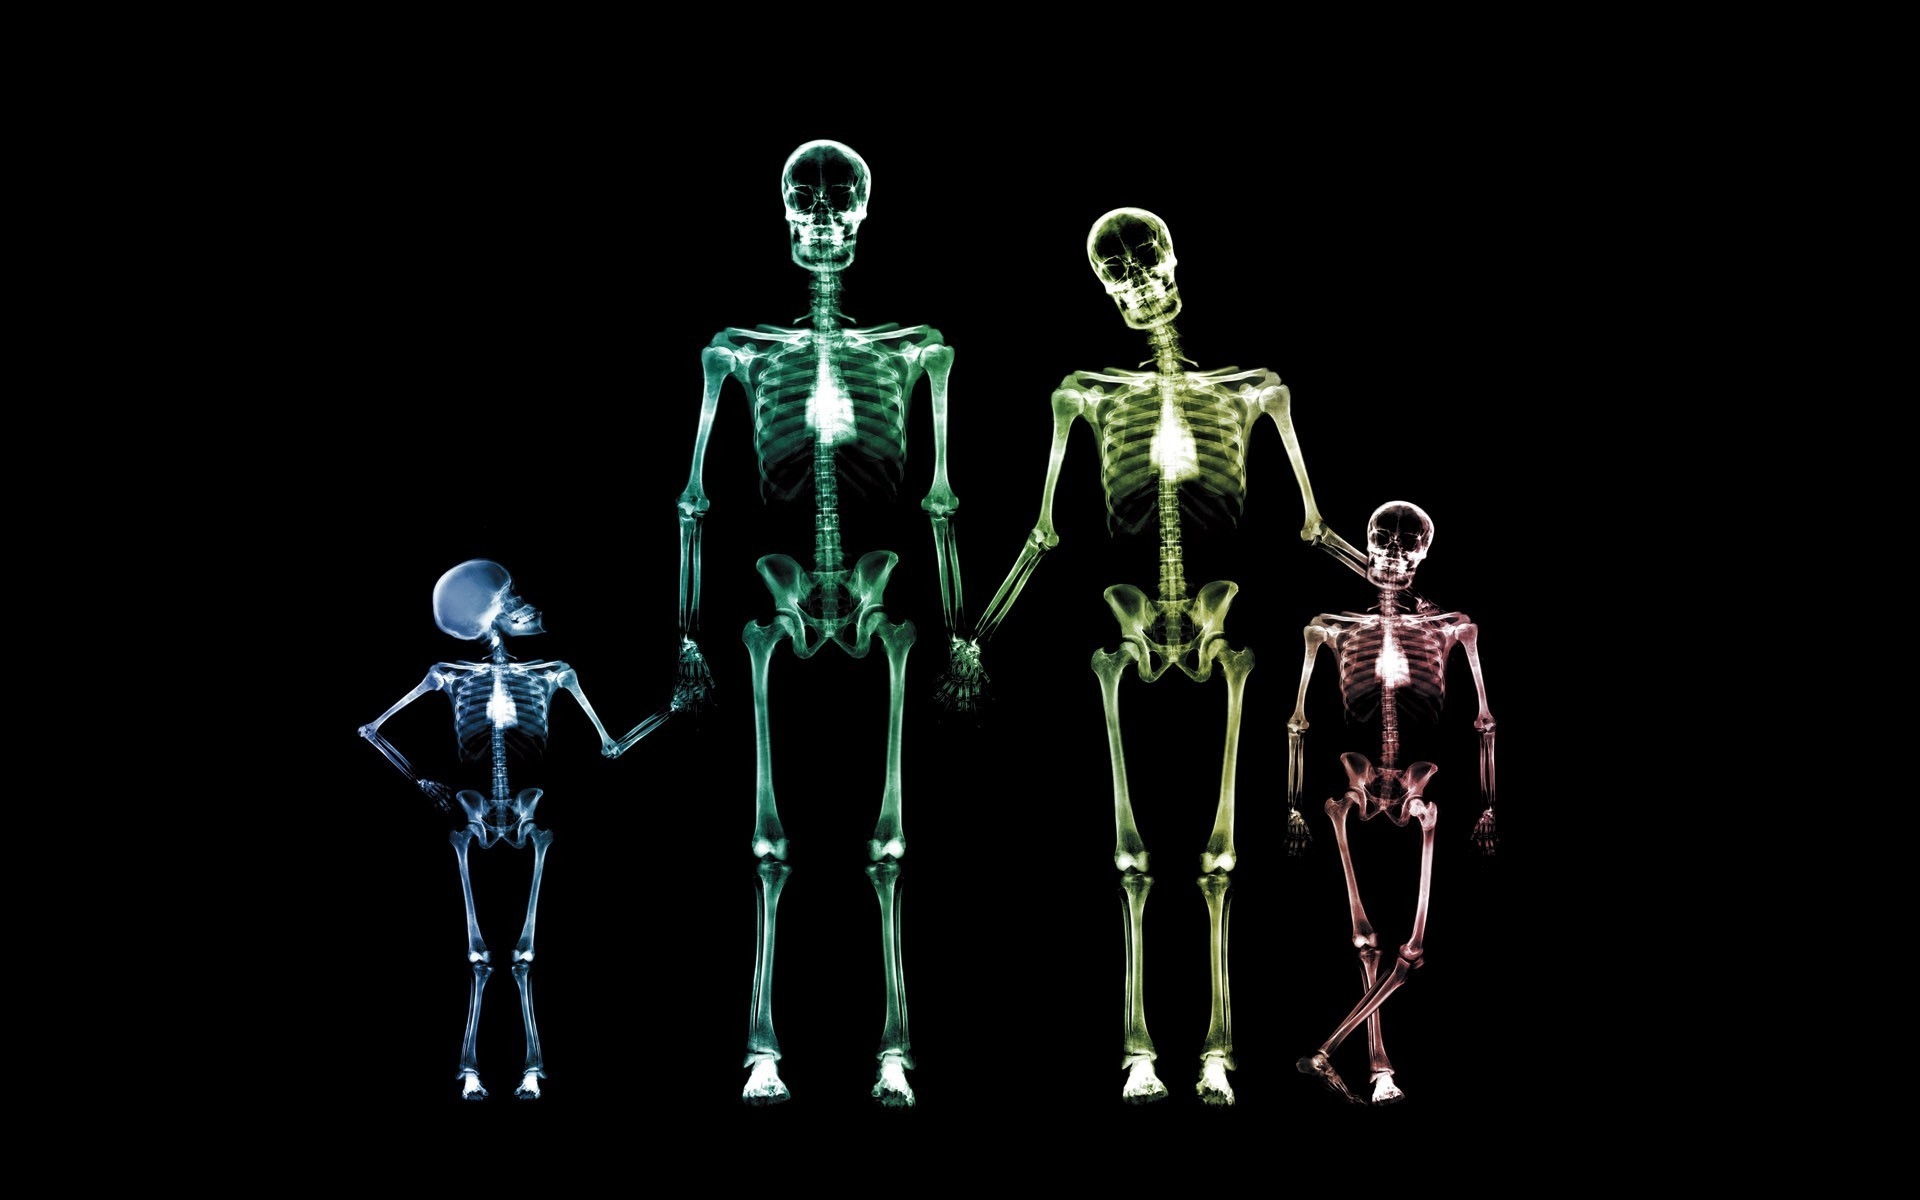 Family Skeletons for 1920 x 1200 widescreen resolution